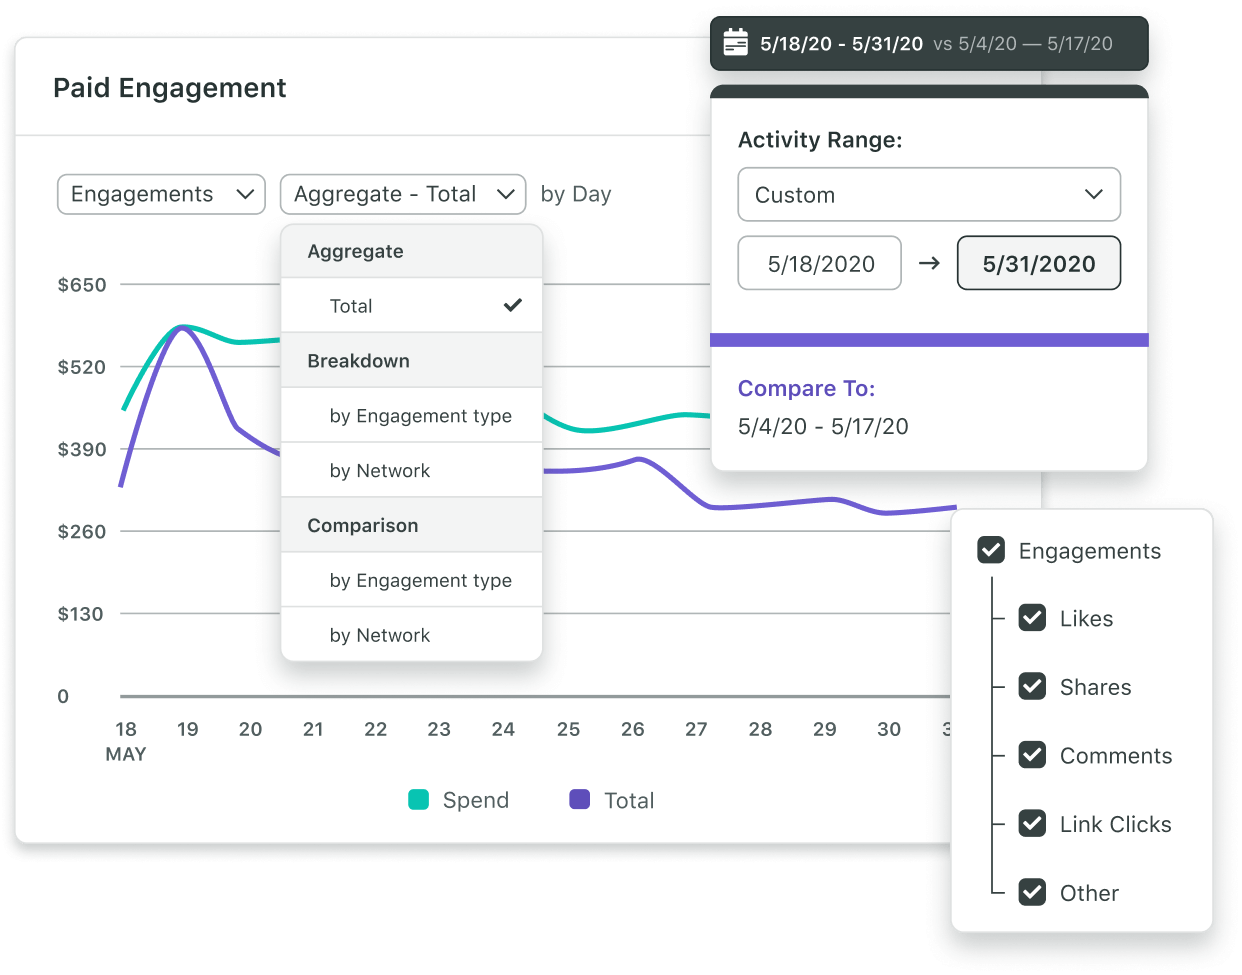 The Paid Performance Report allows users to create custom detailed charts to analyze and compare paid campaign performance.